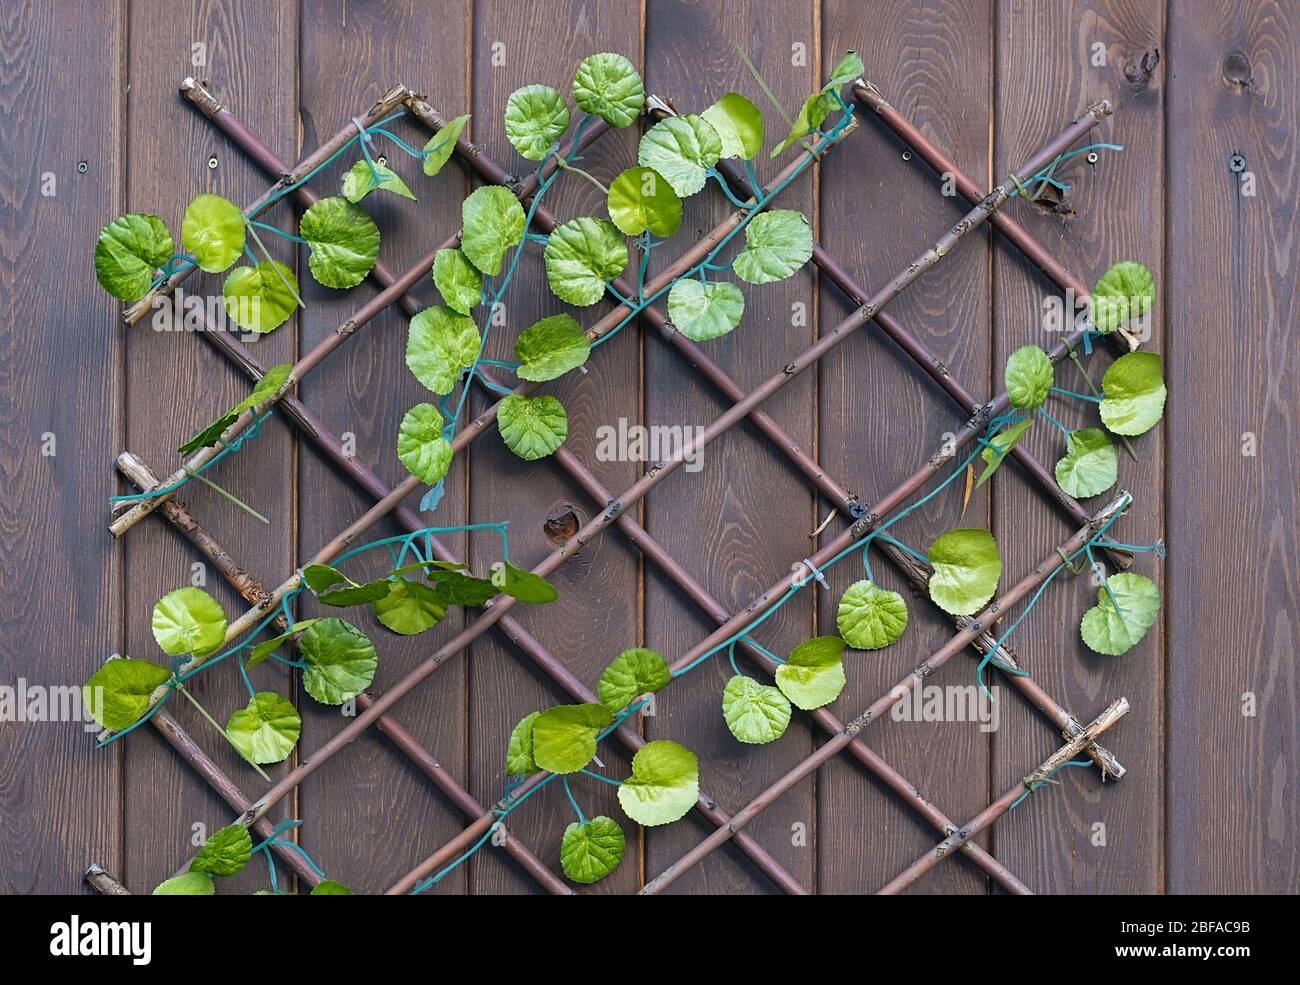 background, texture, artificial leaves of a plant, a bindweed, on the ornament from dry branches are located on a wooden surface Stock Photo